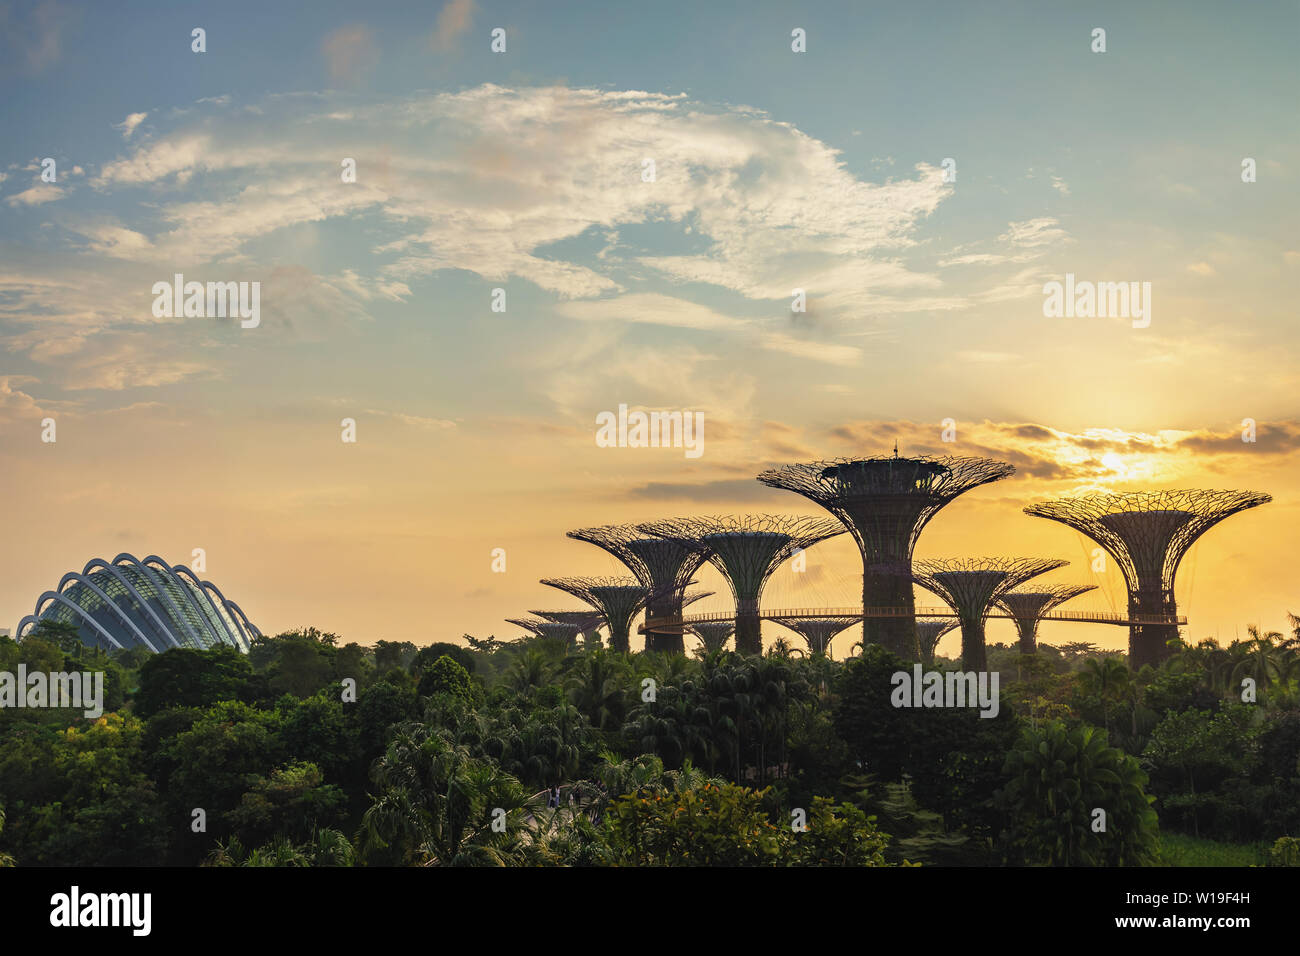 MARINA BAY, SINGAPOUR - 6 janvier, 2019 Singapour : sunrise city skyline at Gardens By The Bay Banque D'Images